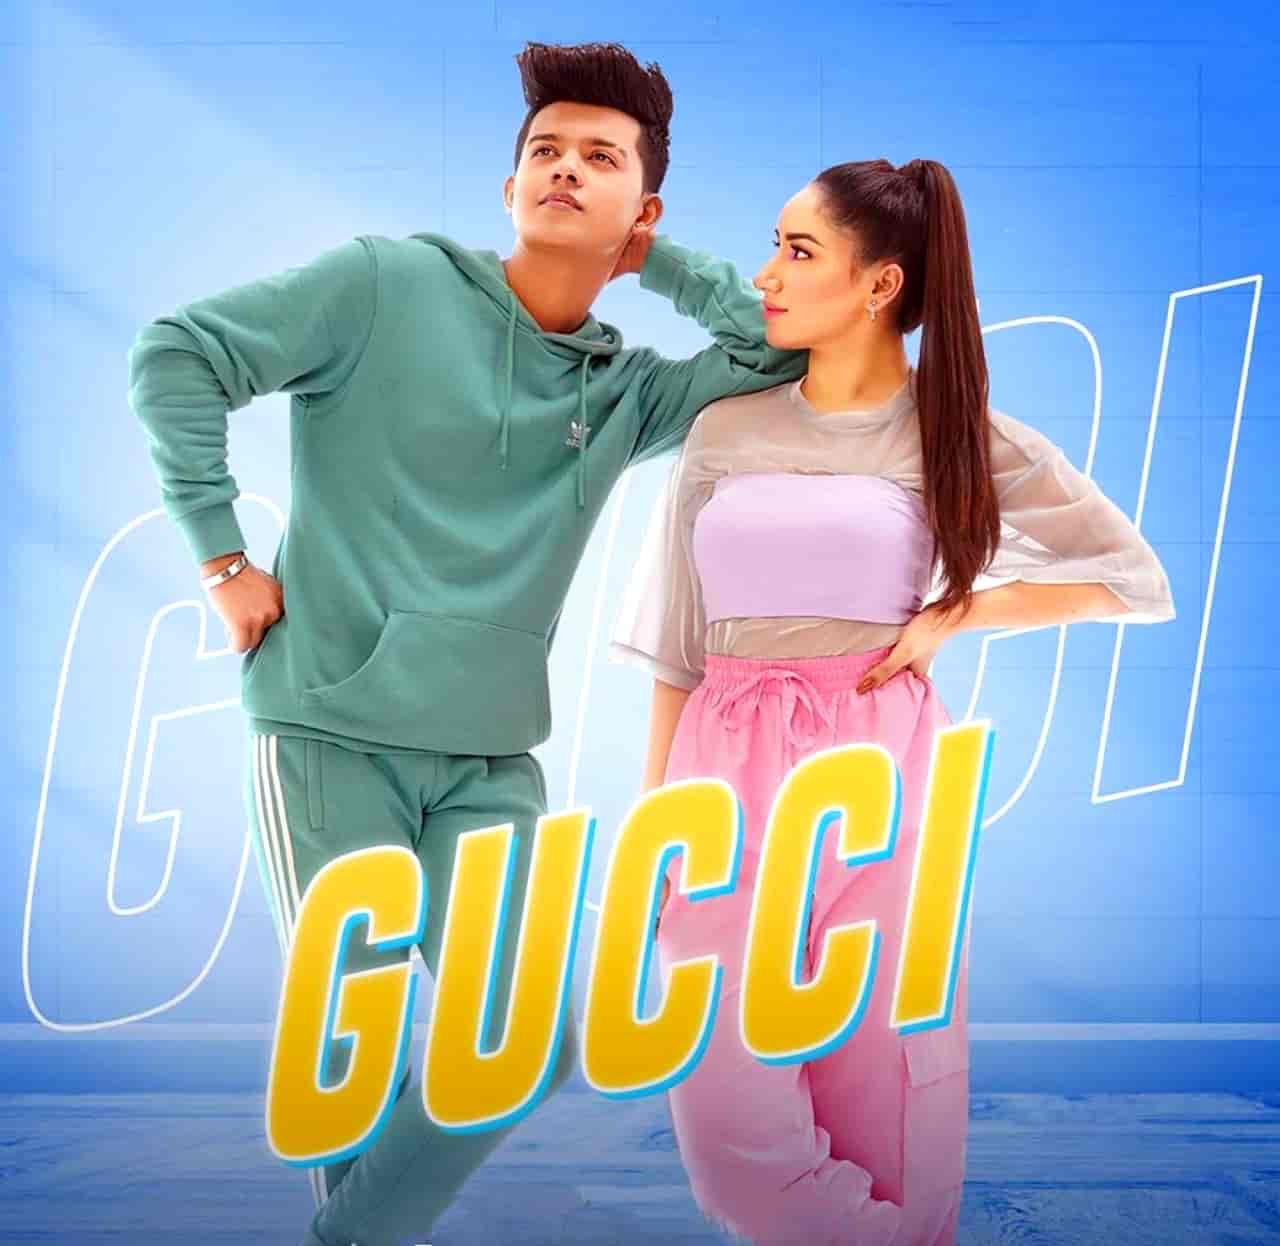 Gucci Song Image Features Aroob Khan and Riyaz Aly